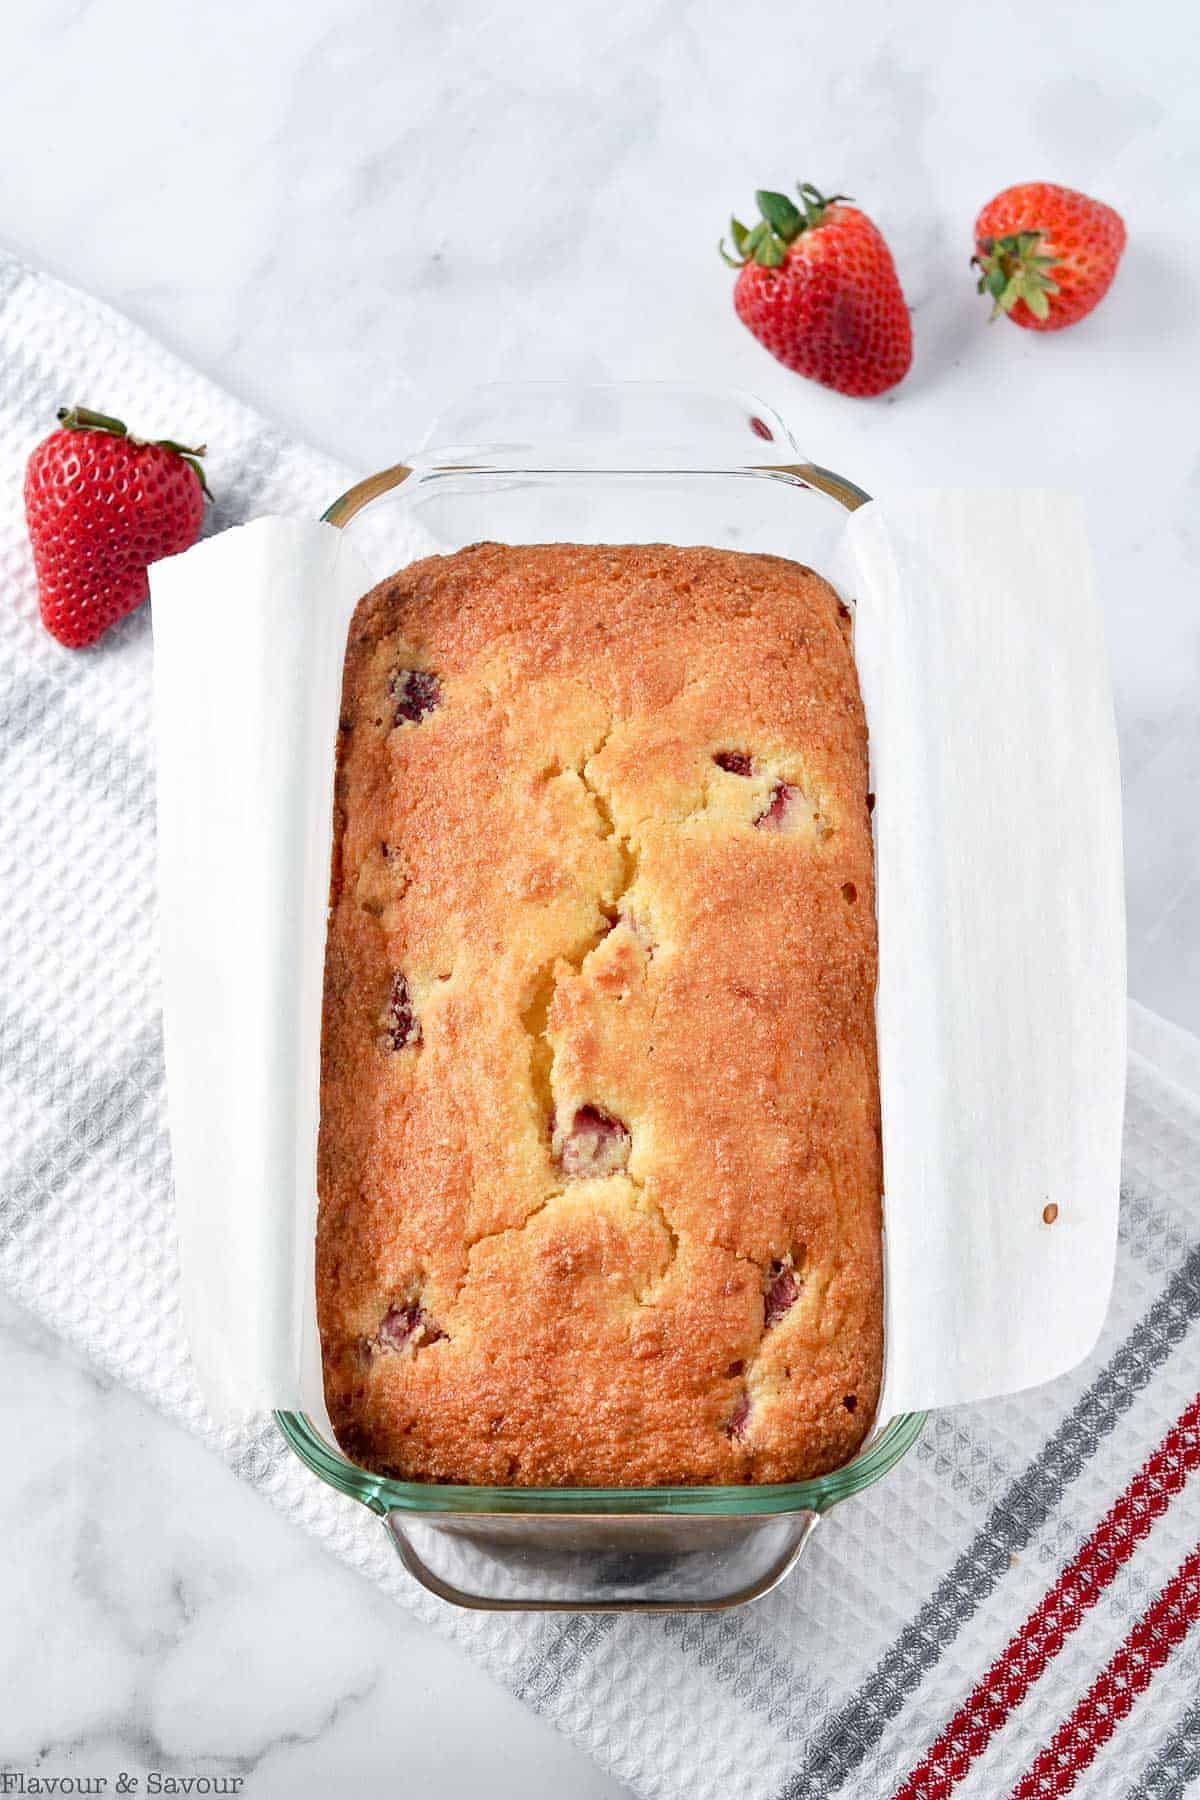 Baked Strawberry Lemon Loaf in a loaf pan with fresh strawberries on the counter.